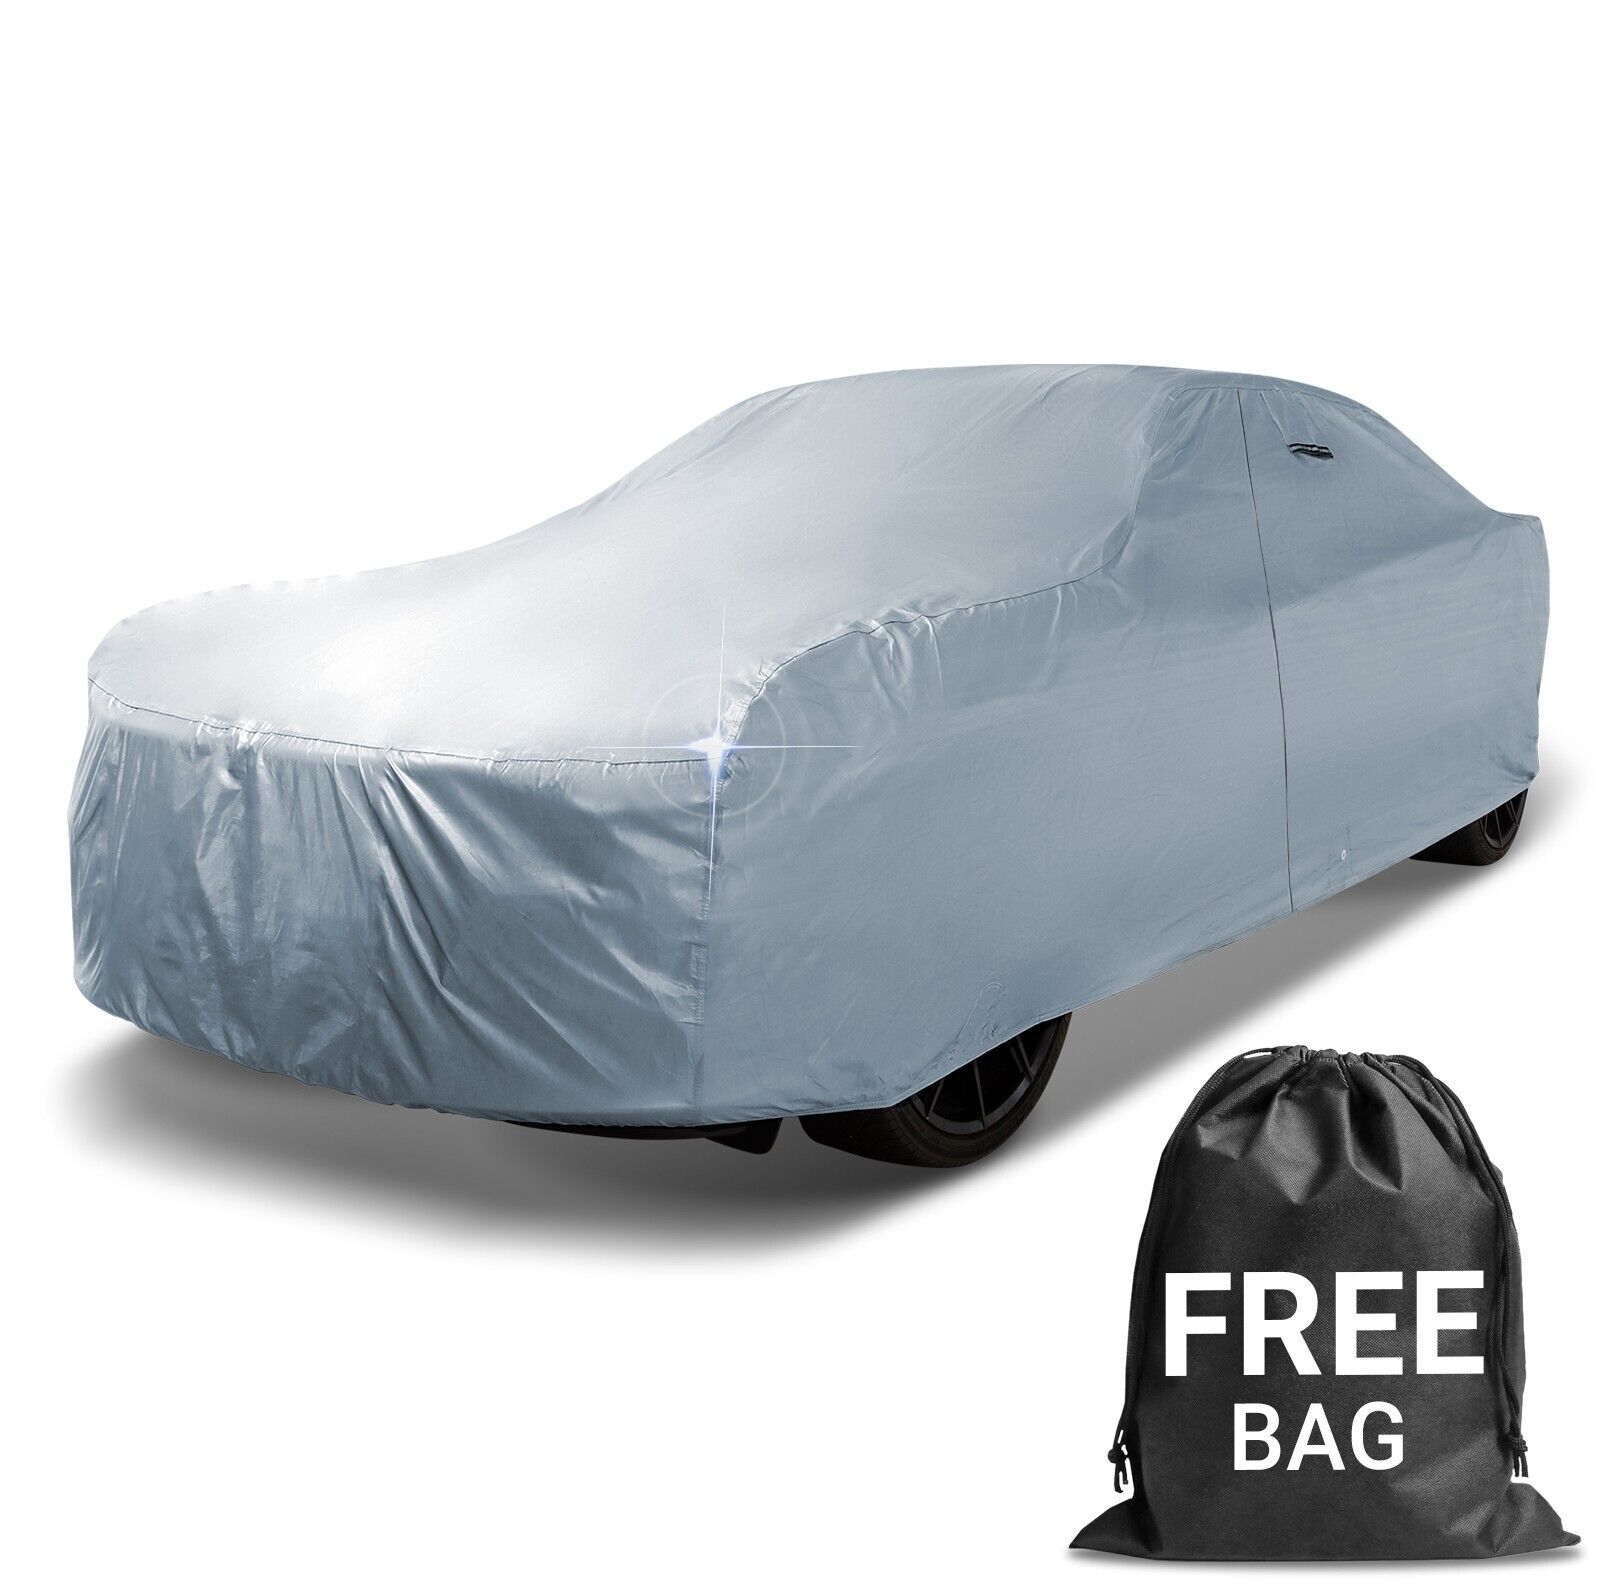 1971-1977 Dodge Demon Custom Car Cover - All-Weather Waterproof Protection